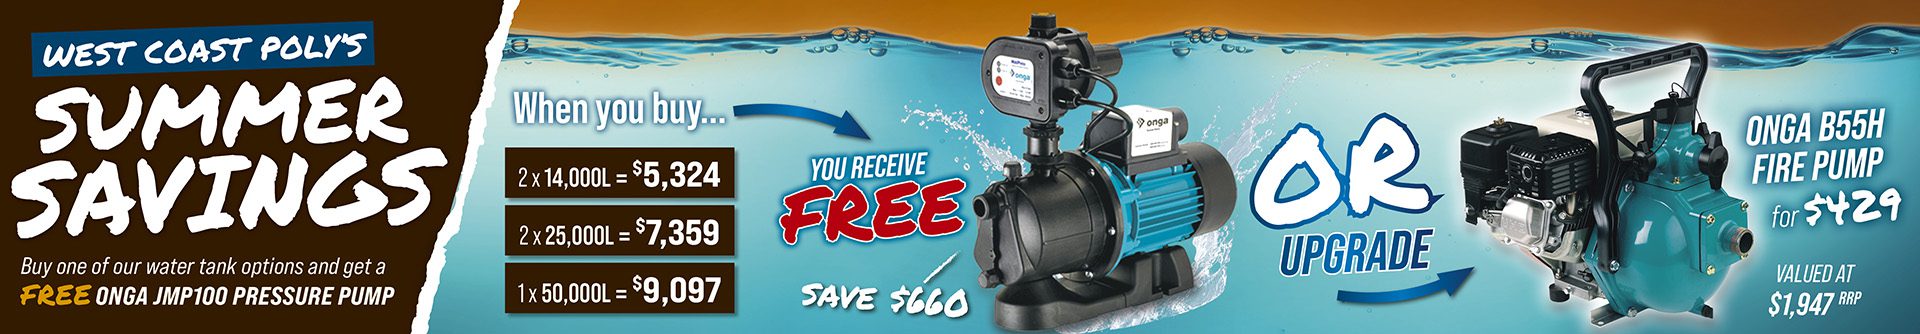 West Coast Poly - Summer Savings 2023 - Free Onga Jmp100 Pressure Pump With Selected Tank - Limited Time